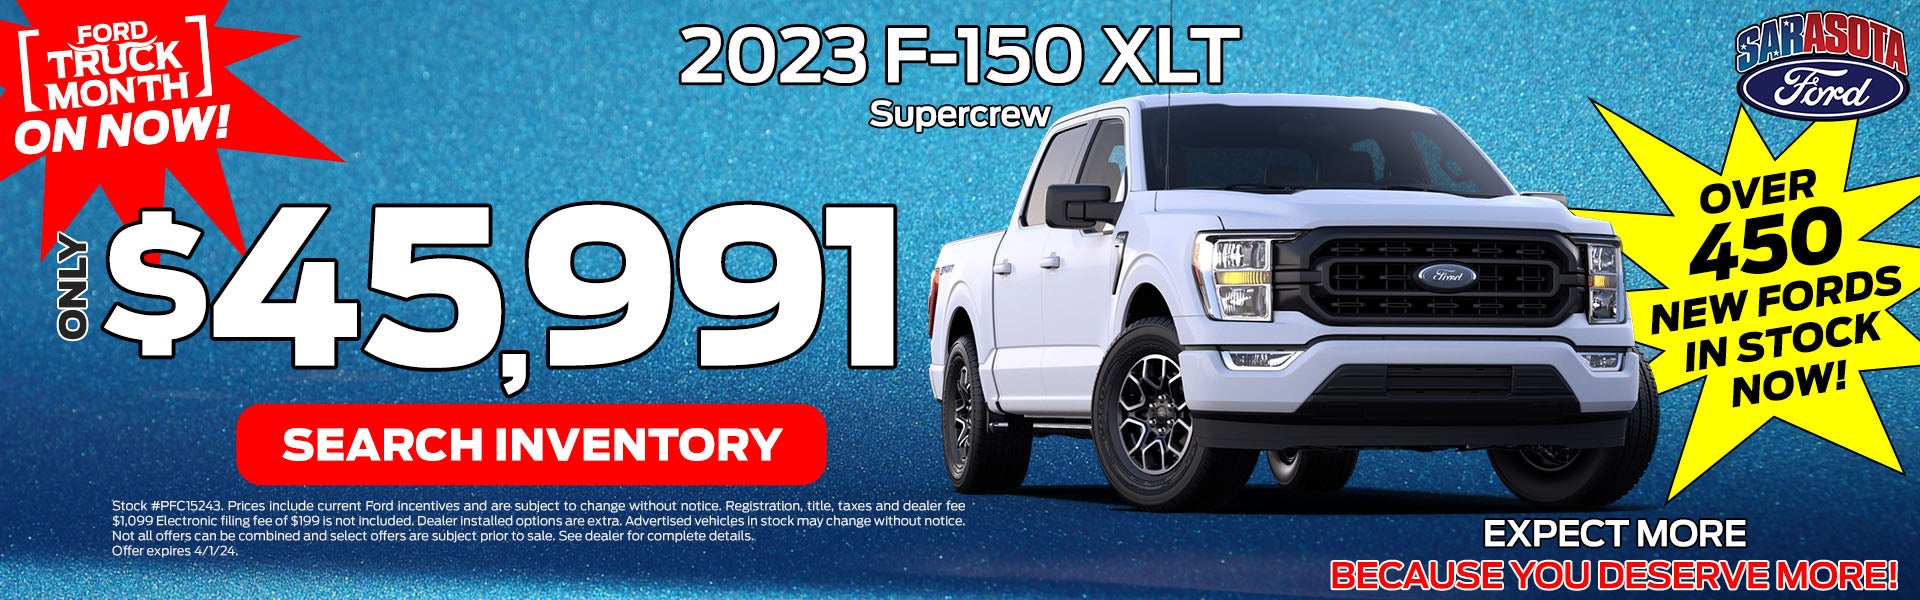 $45,991 promise price on F-150 XLT at Sarasota Ford